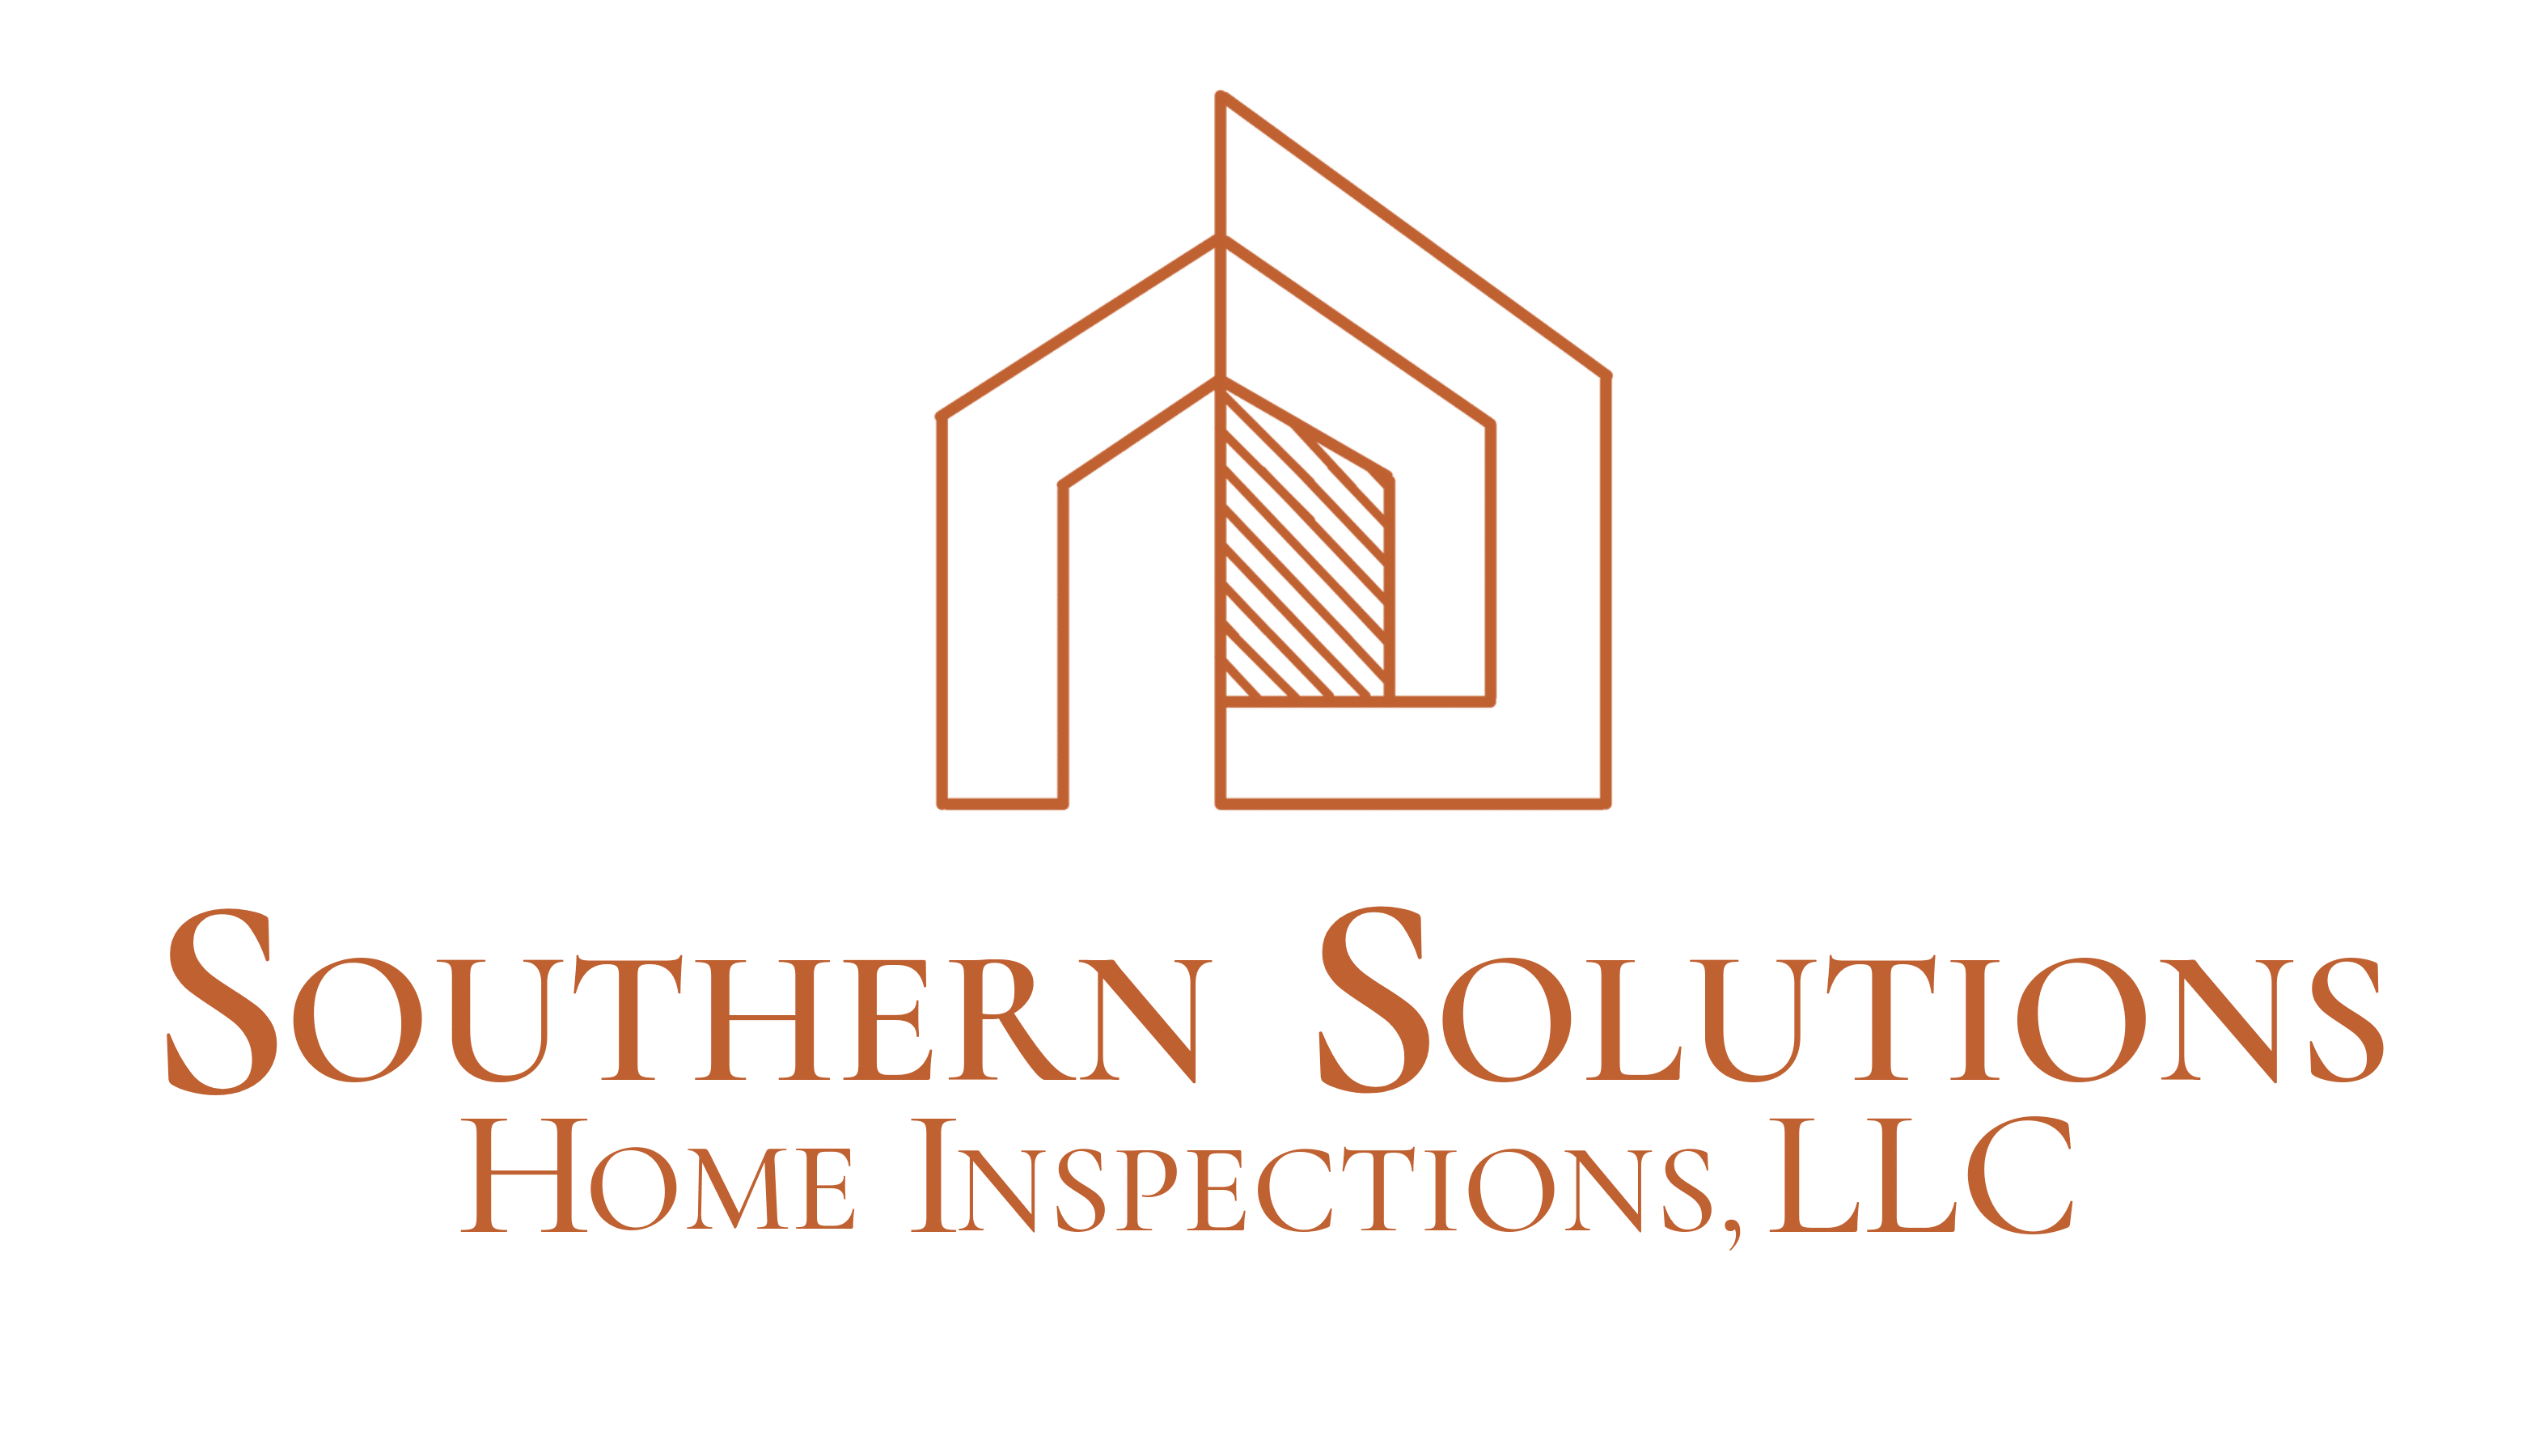 Southern Solutions Home Inspections, LLC Logo